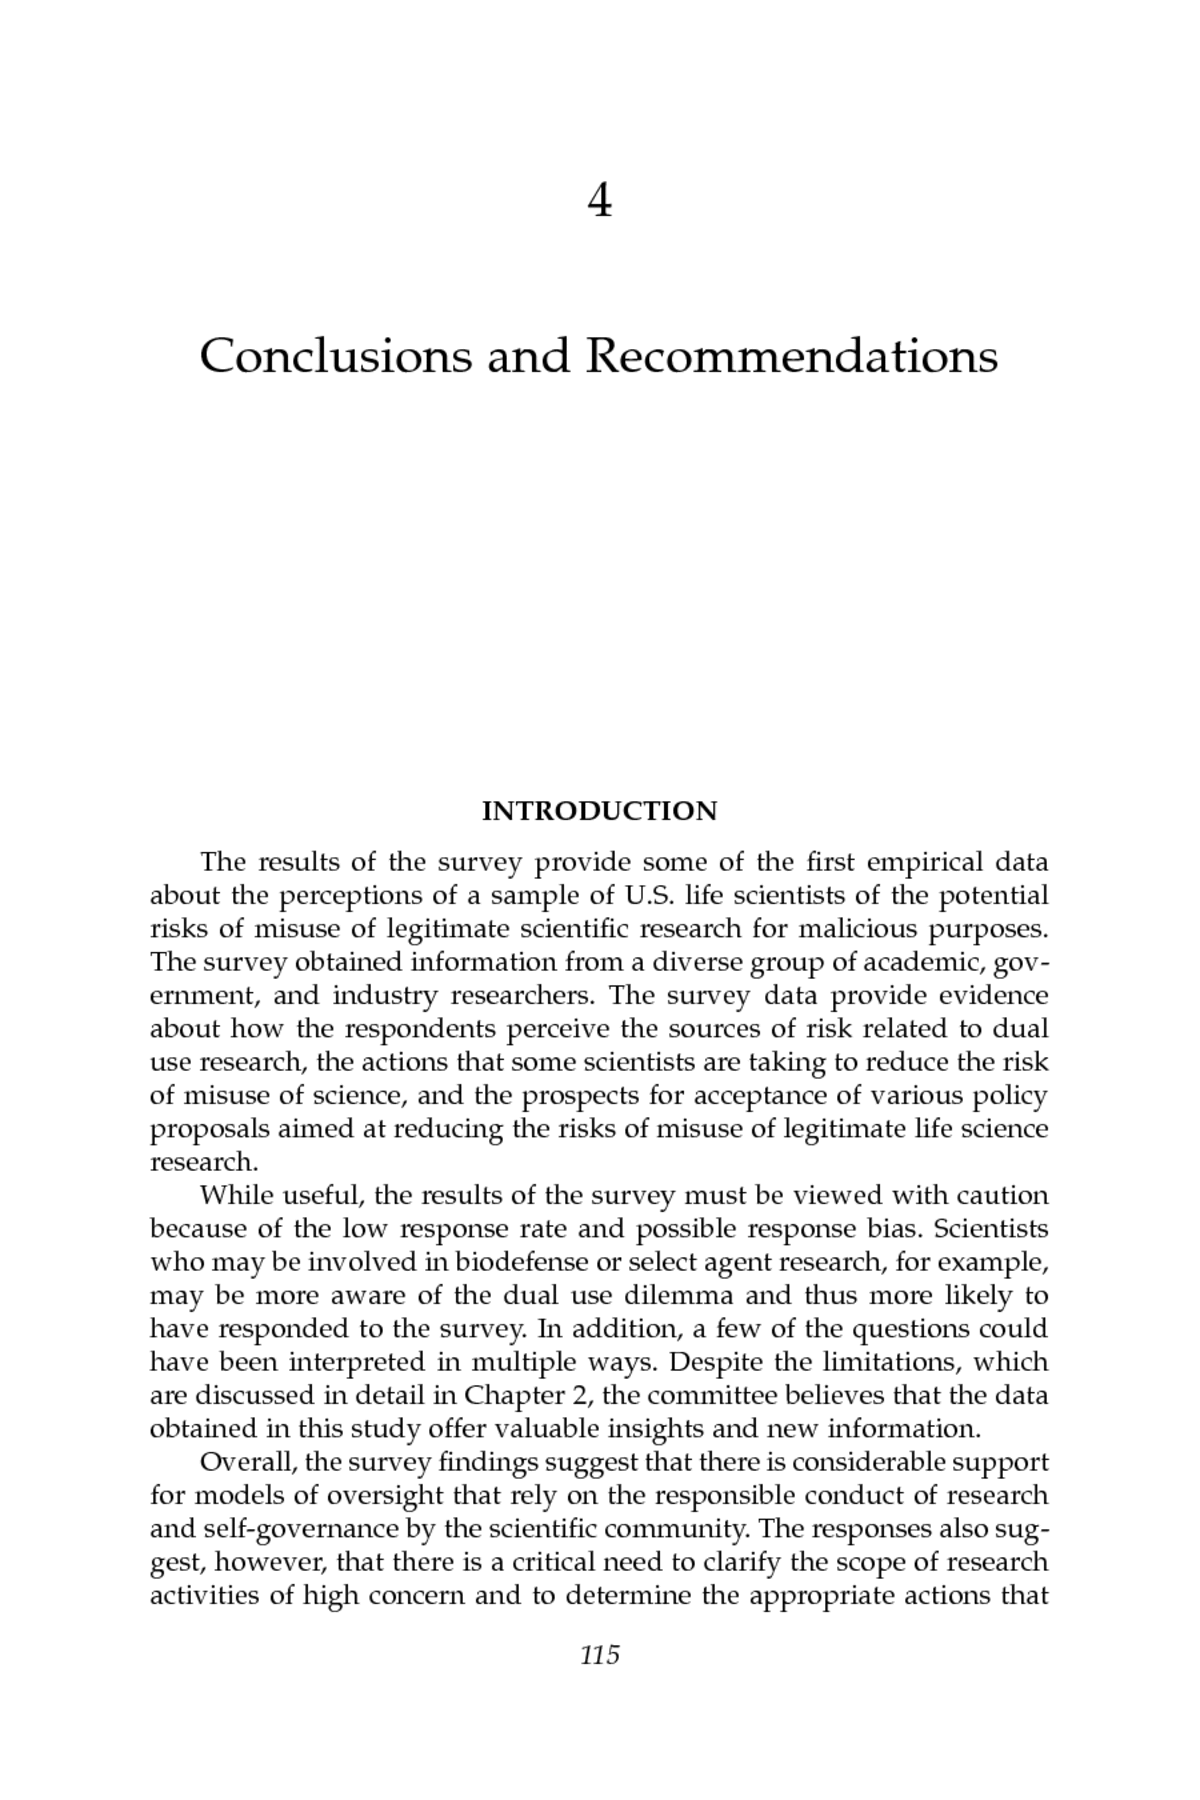 example of research conclusion and recommendation